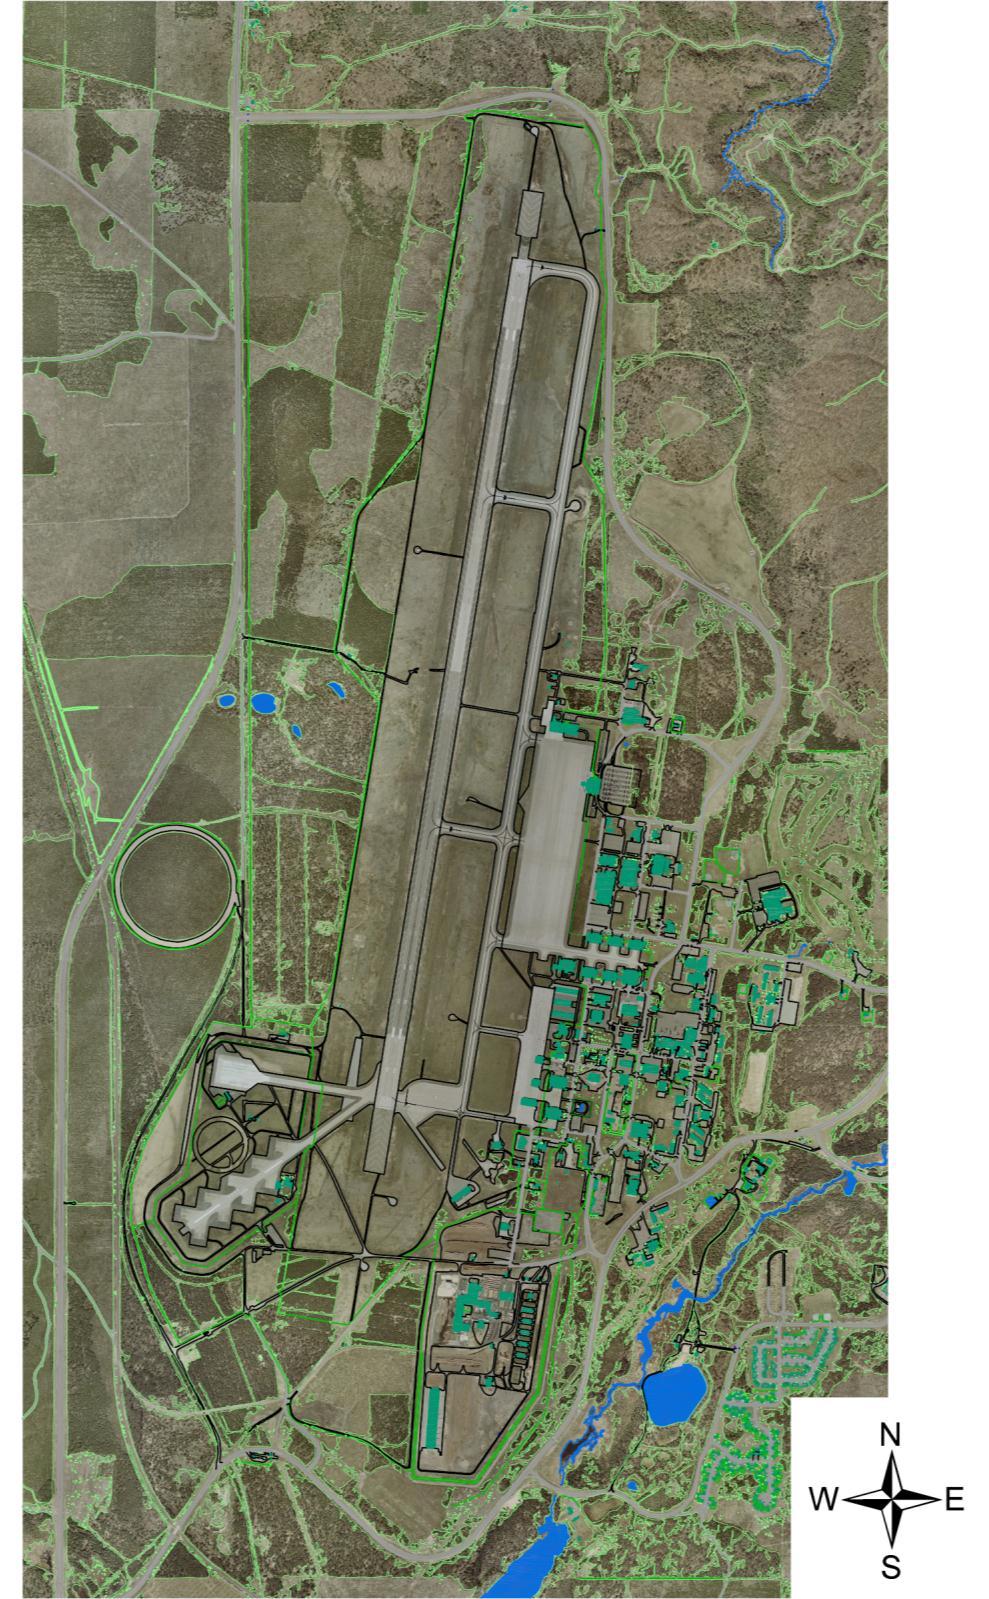 Figure 3-1 General Airport Layout Source: Mead & Hunt, Inc.